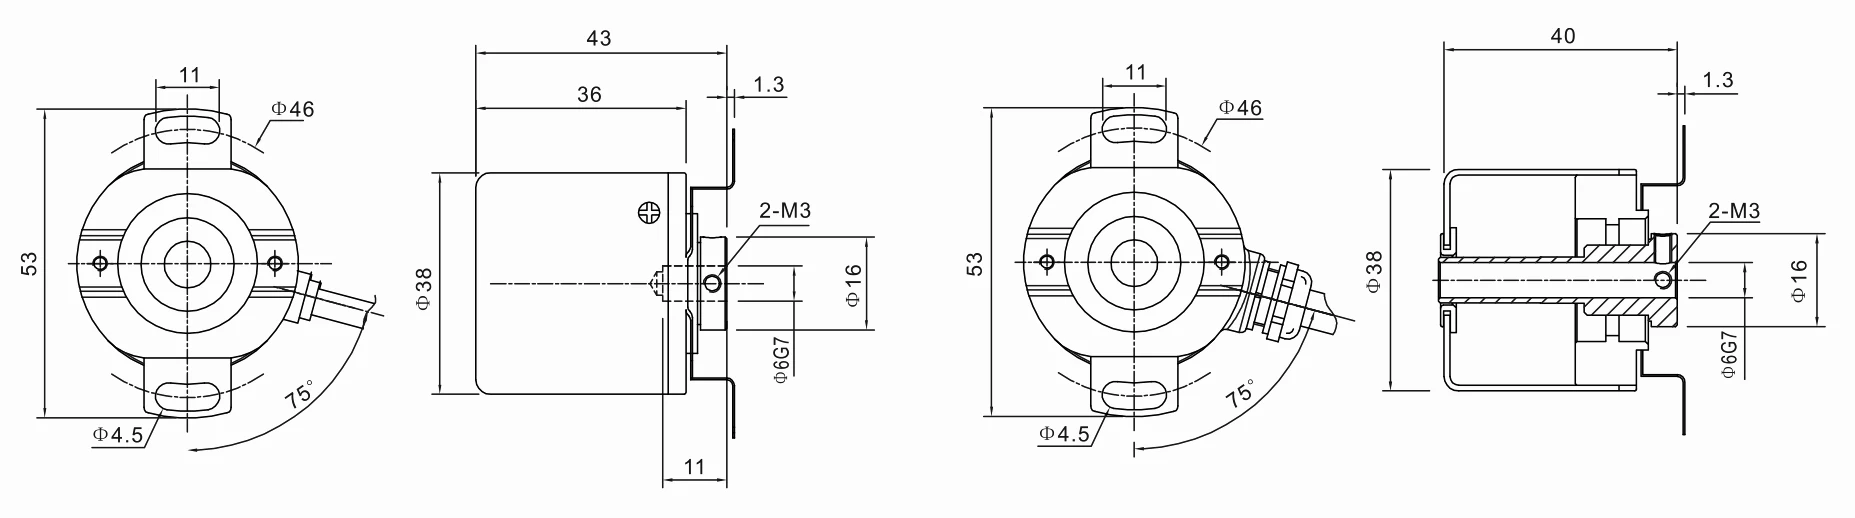 IHC3806 for automatic control Hollow Shaft Incremental Rotary Encoder with 1000PPR